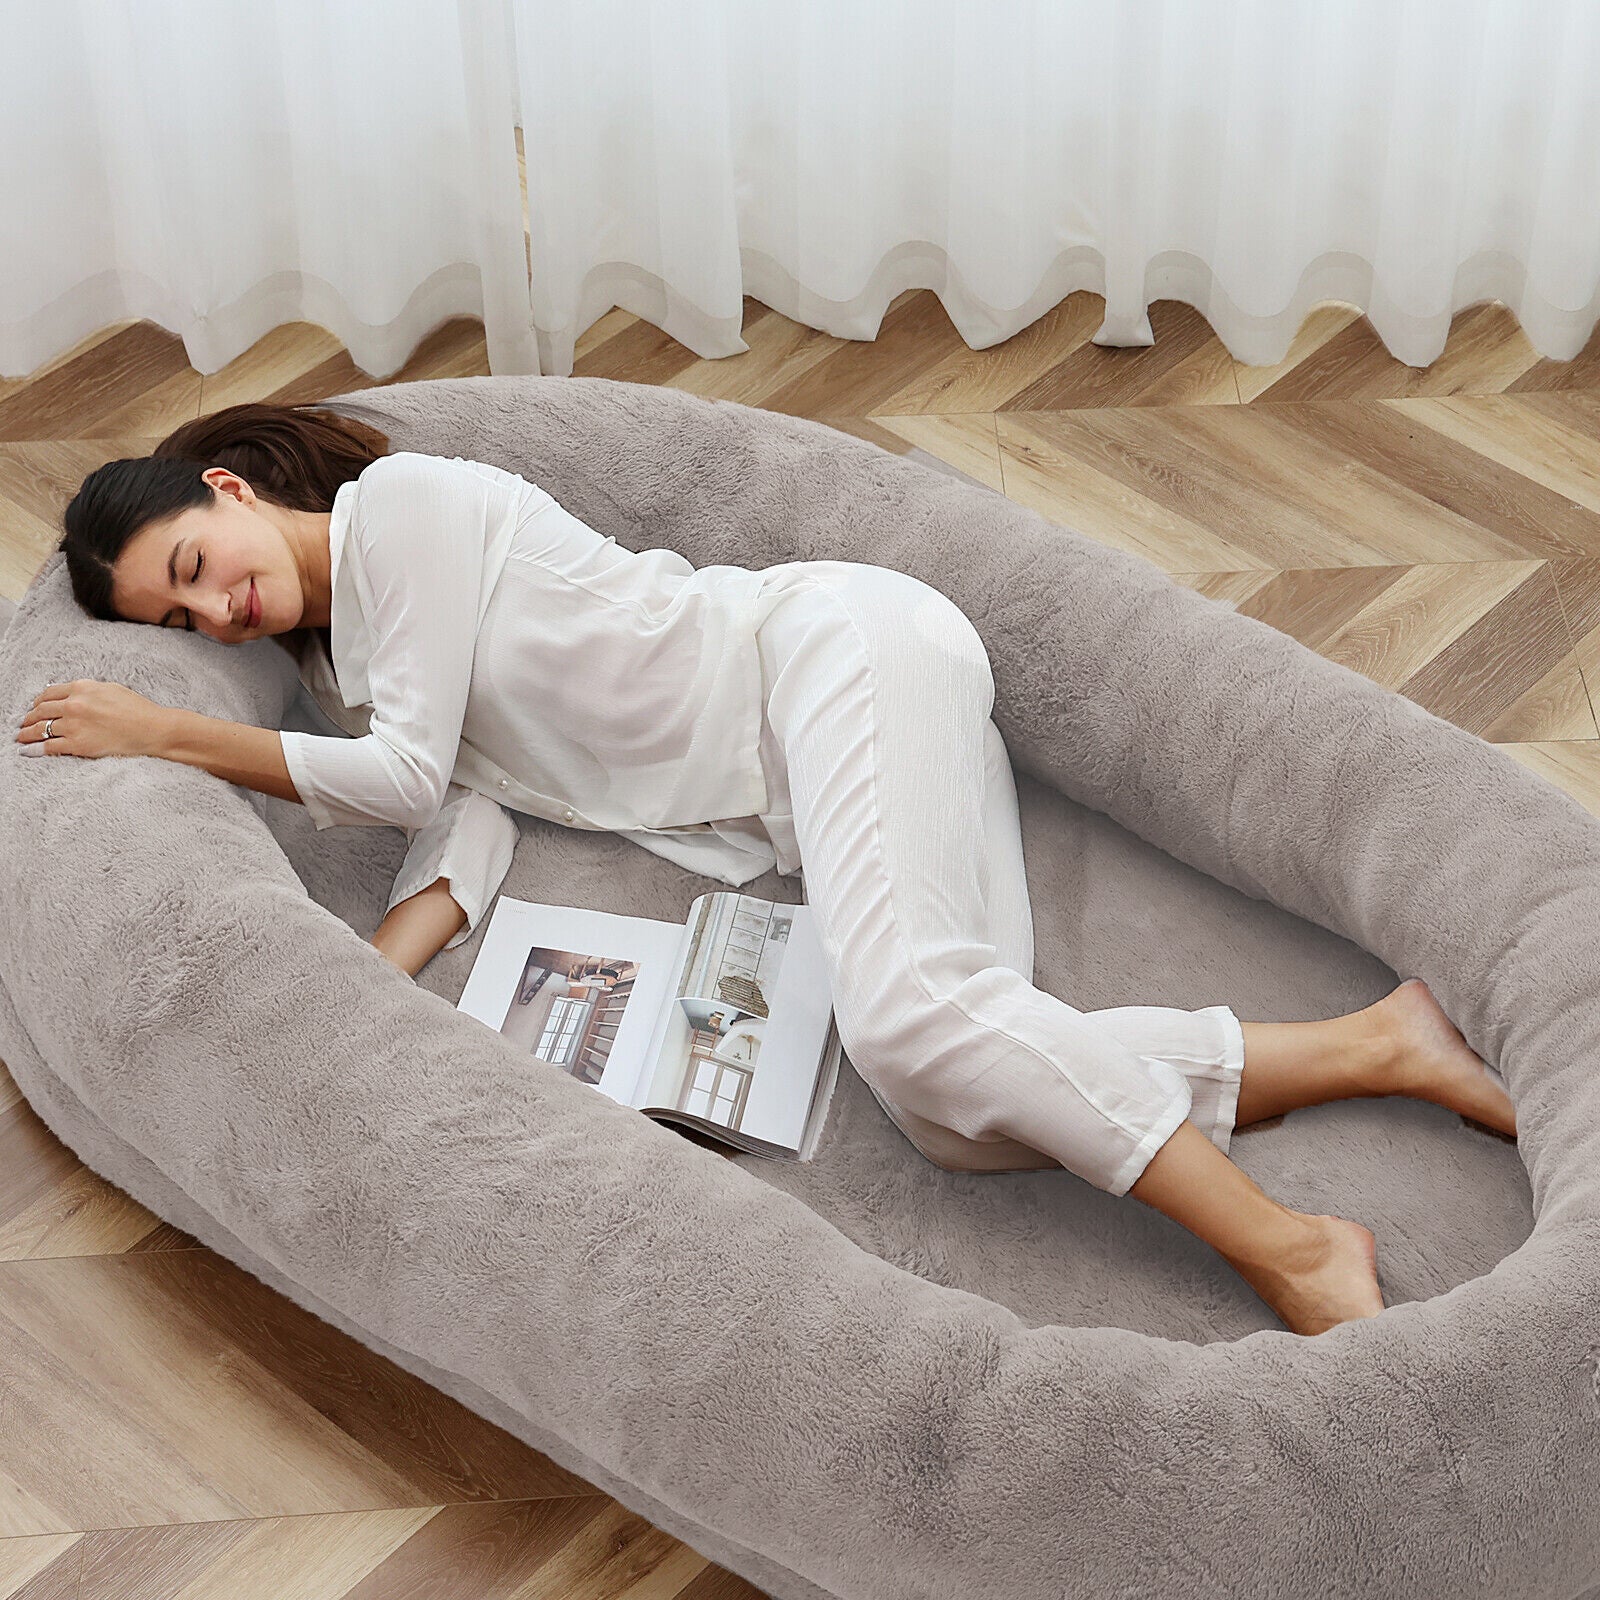 The Original Calming Dog Bed for Humans